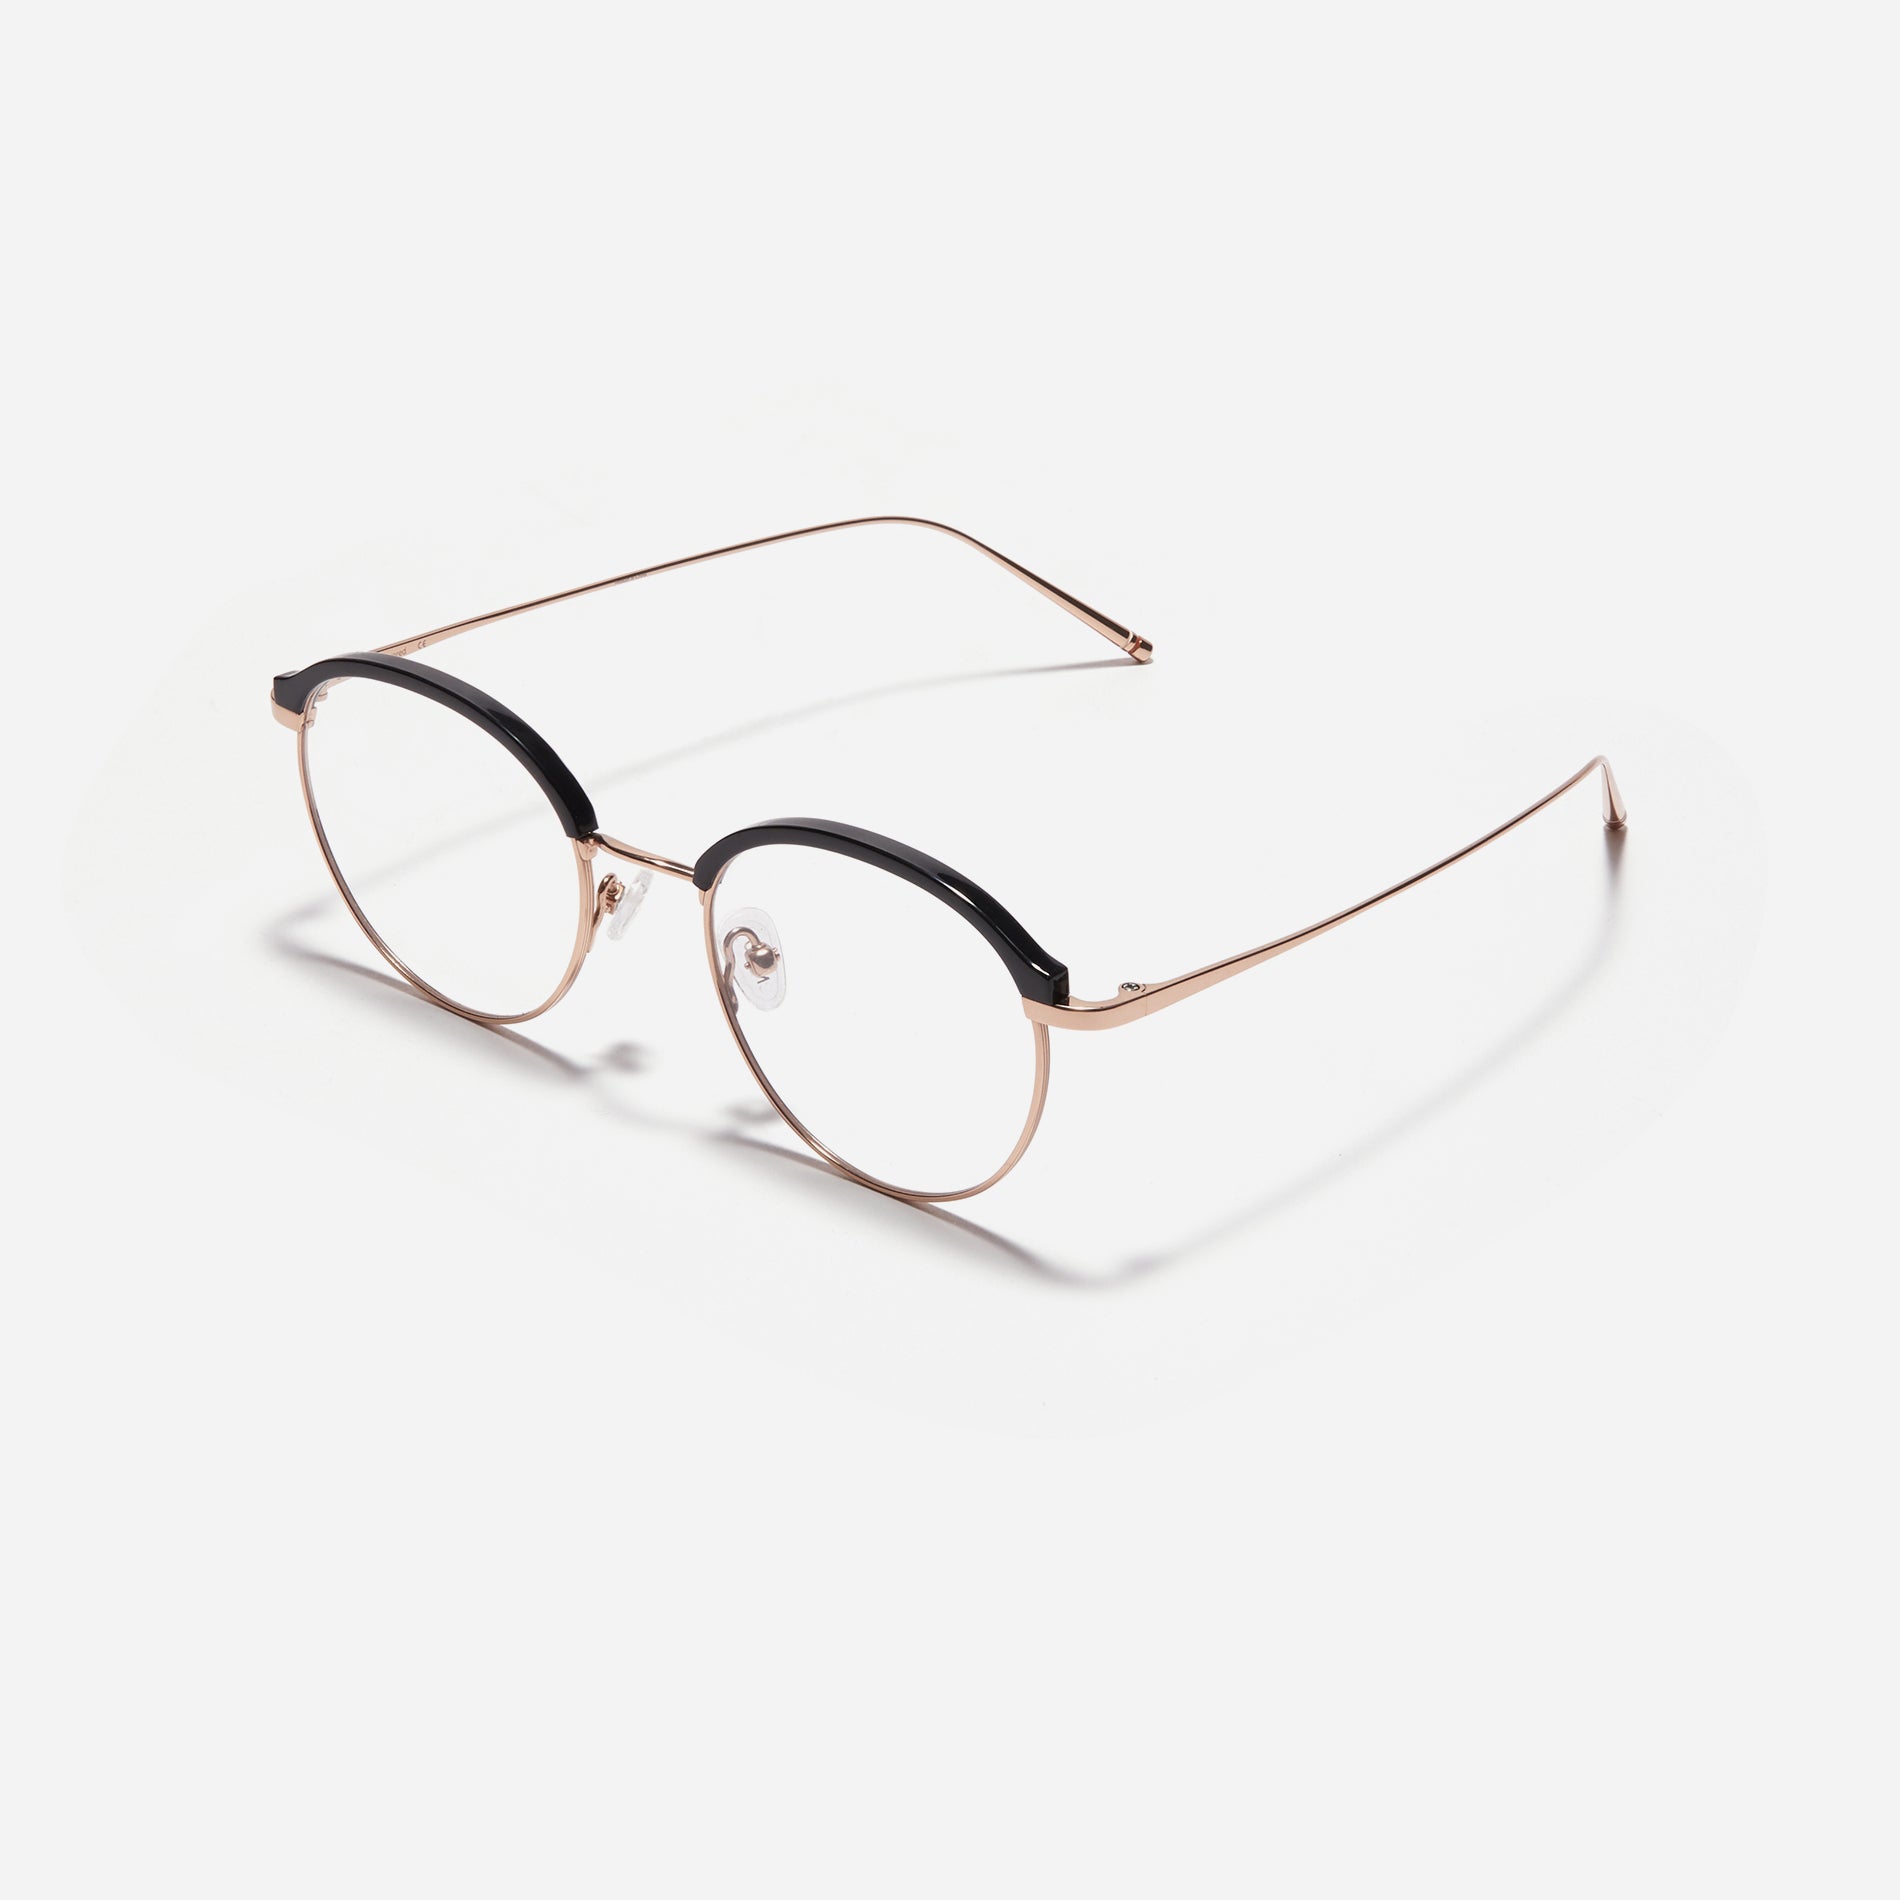 Round-shaped combination eyeglasses with a semi-rimless design. Plia R design incorporates dual lining on the tips to prevent slipping and ensure a consistently comfortable wearing experience. 